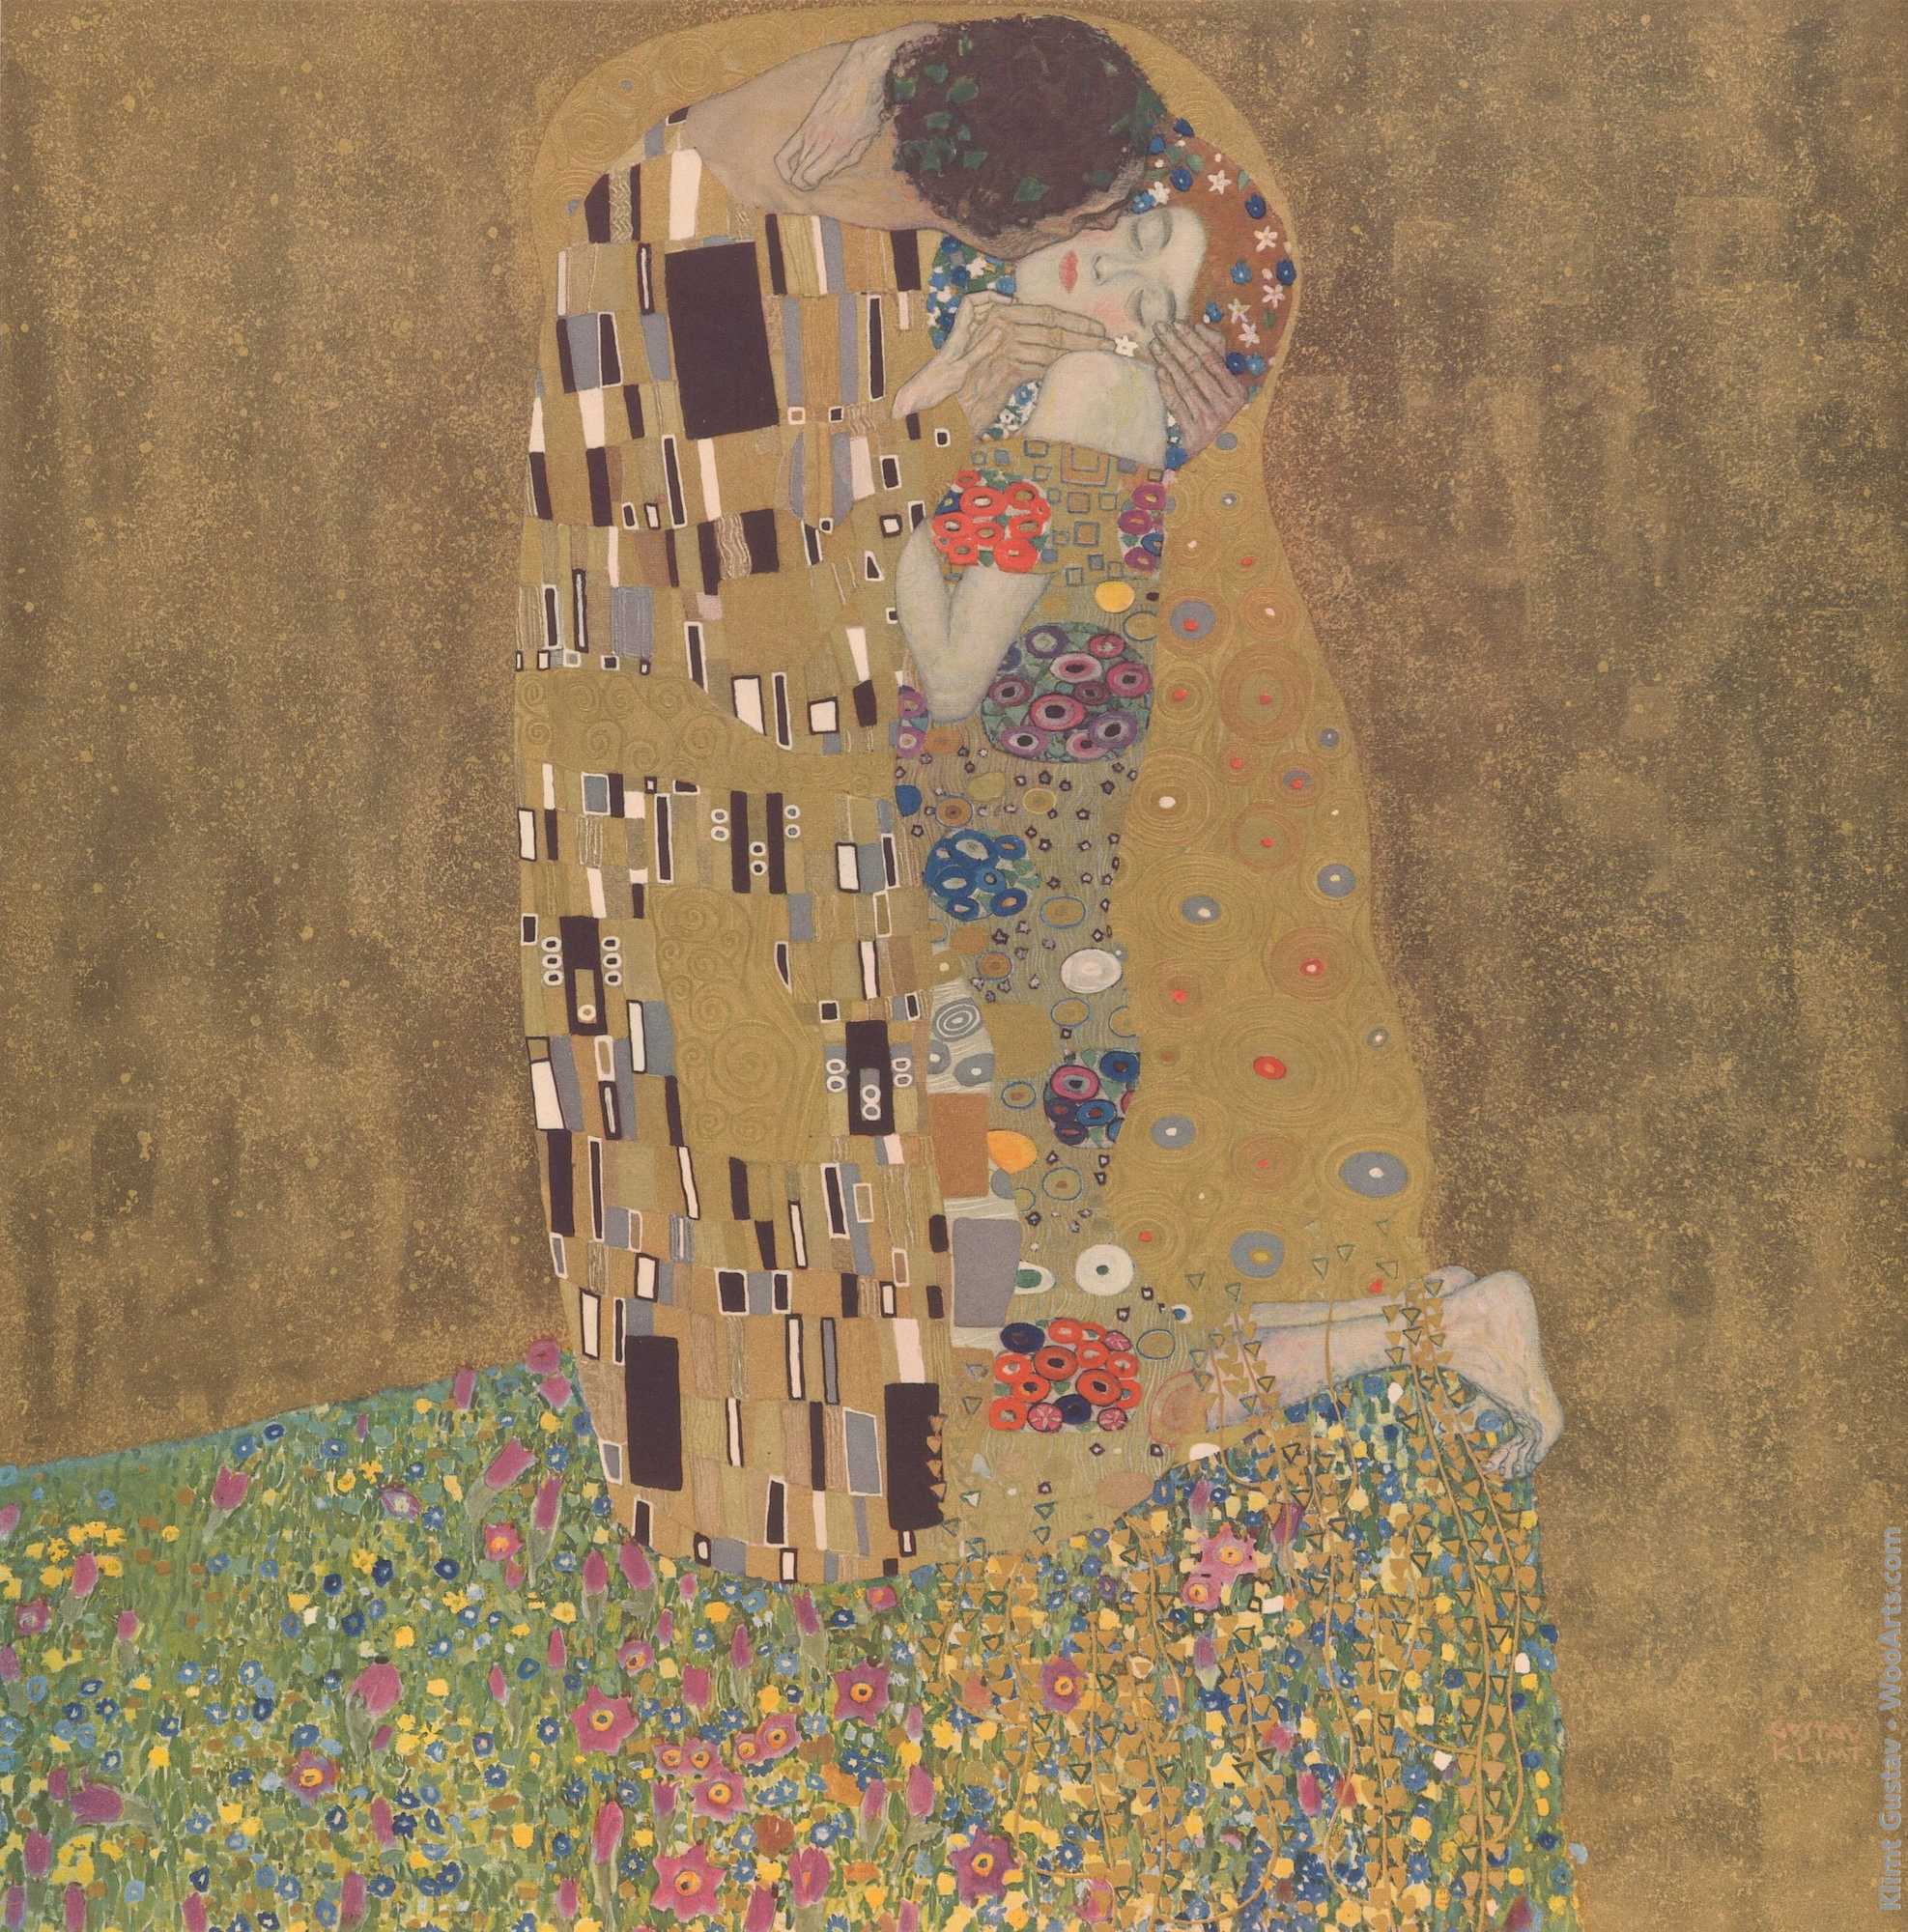 The Kiss after Gustav Klimt, plate 41, The work of Gustav Klimt Gustav Klimt 1918